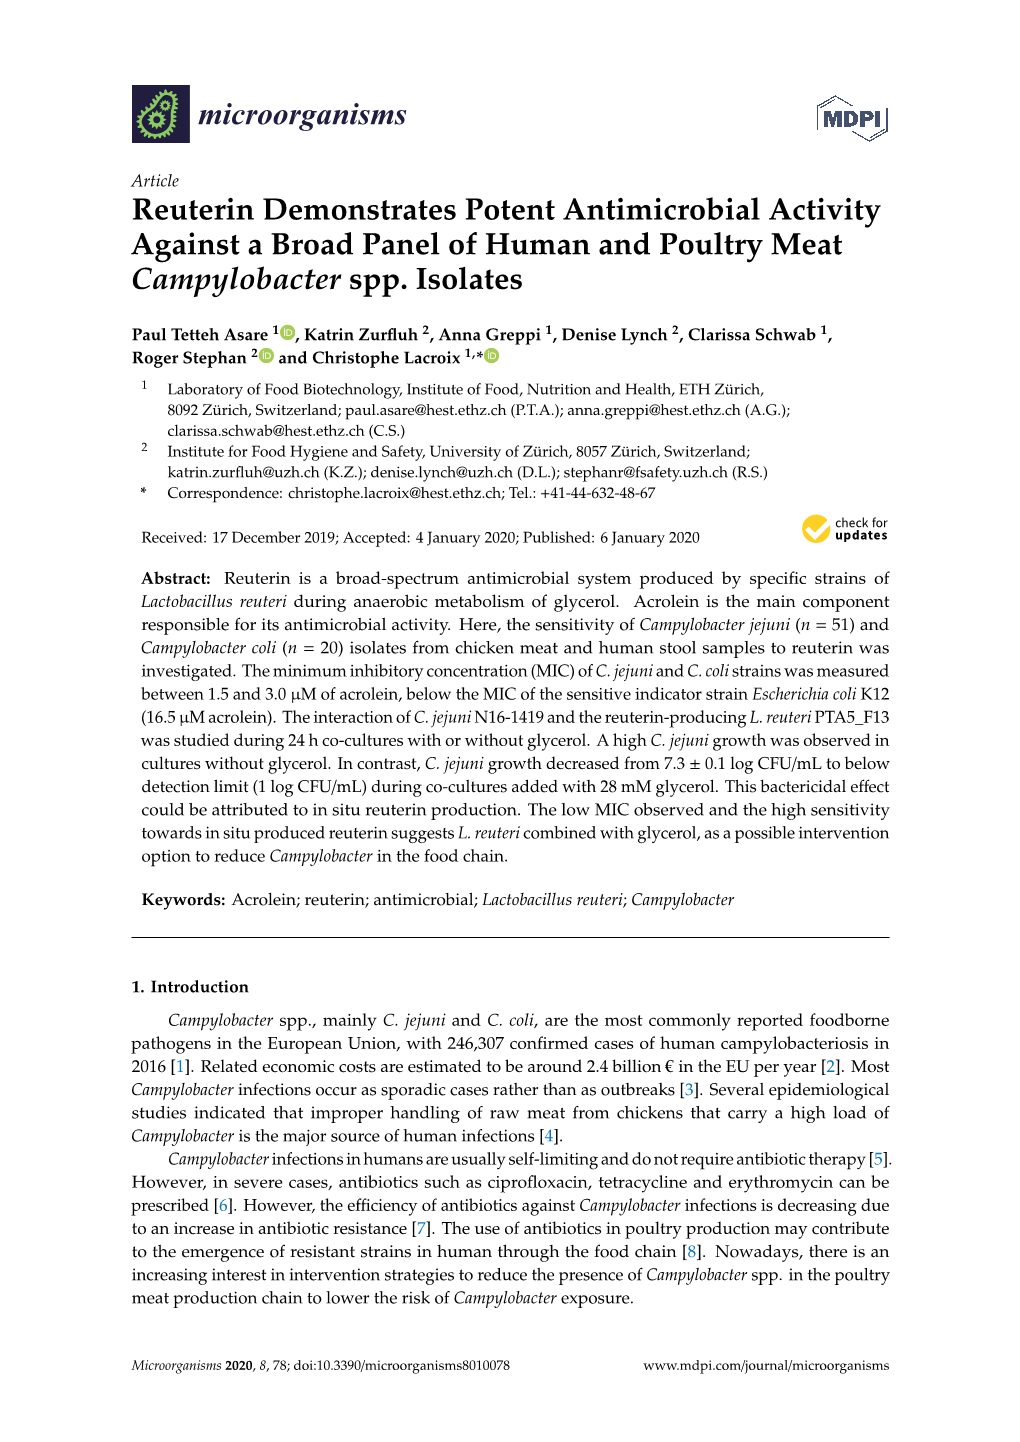 Reuterin Demonstrates Potent Antimicrobial Activity Against a Broad Panel of Human and Poultry Meat Campylobacter Spp. Isolates